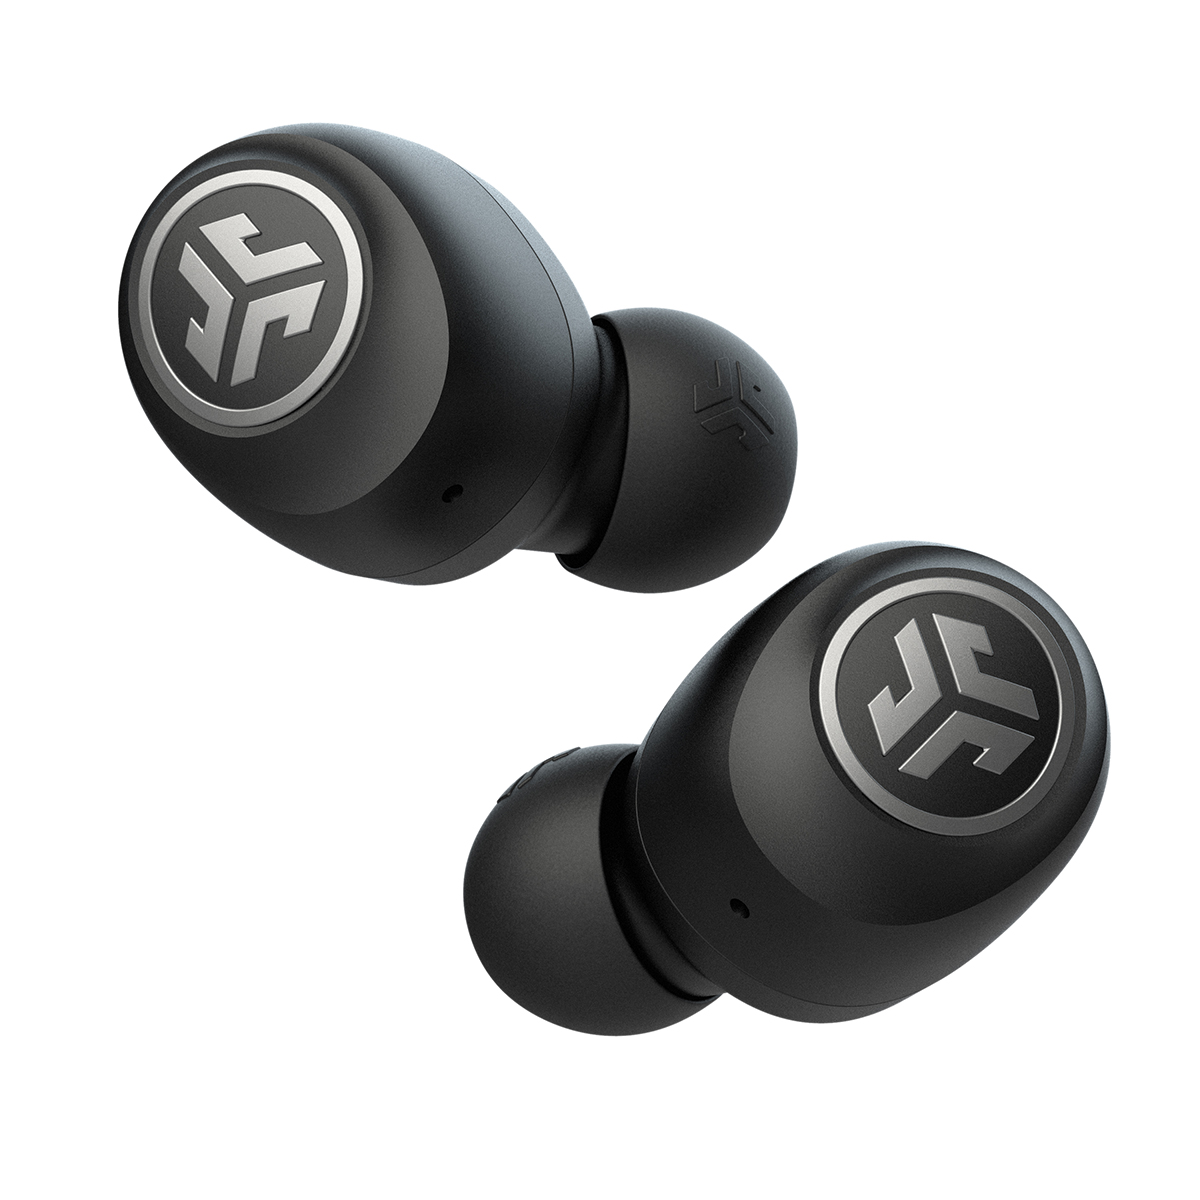 GO Air True Wireless Earbuds - Black - image 2 of 3